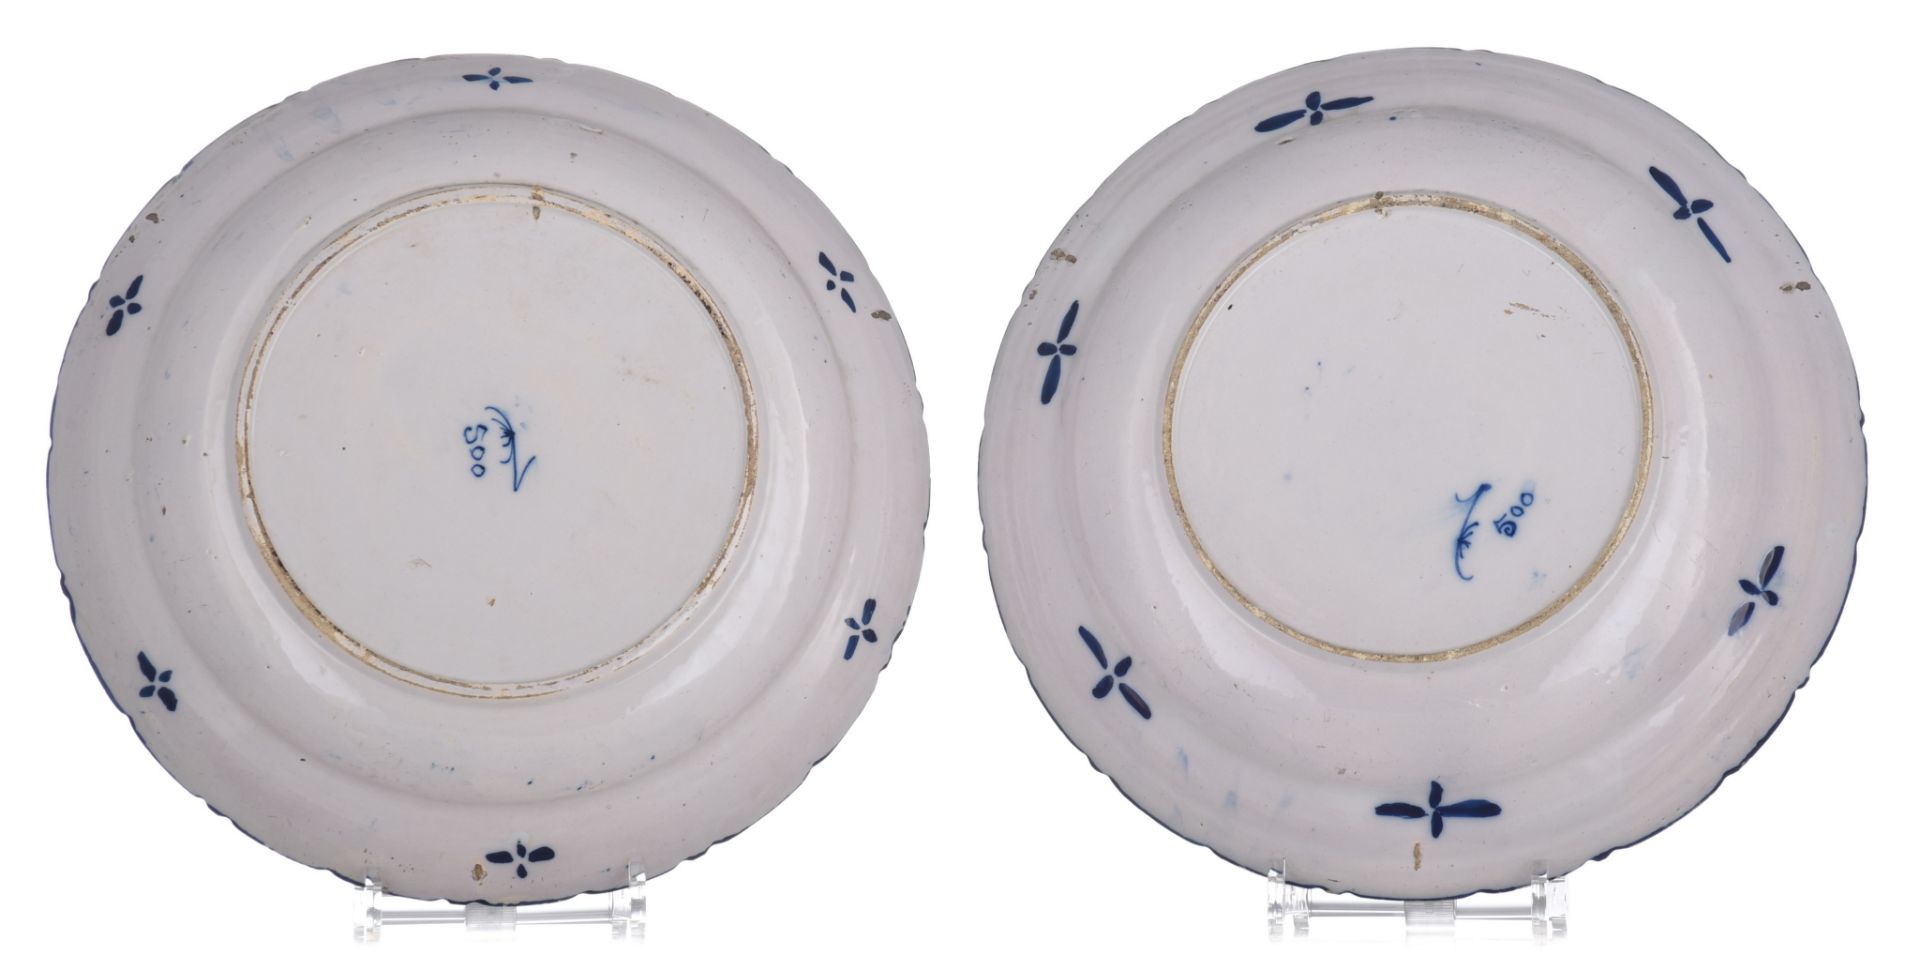 A collection of six Delft blue and white flower basket chargers, marked 'De Klauw', 18thC, ¯ 35 cm - Image 5 of 10